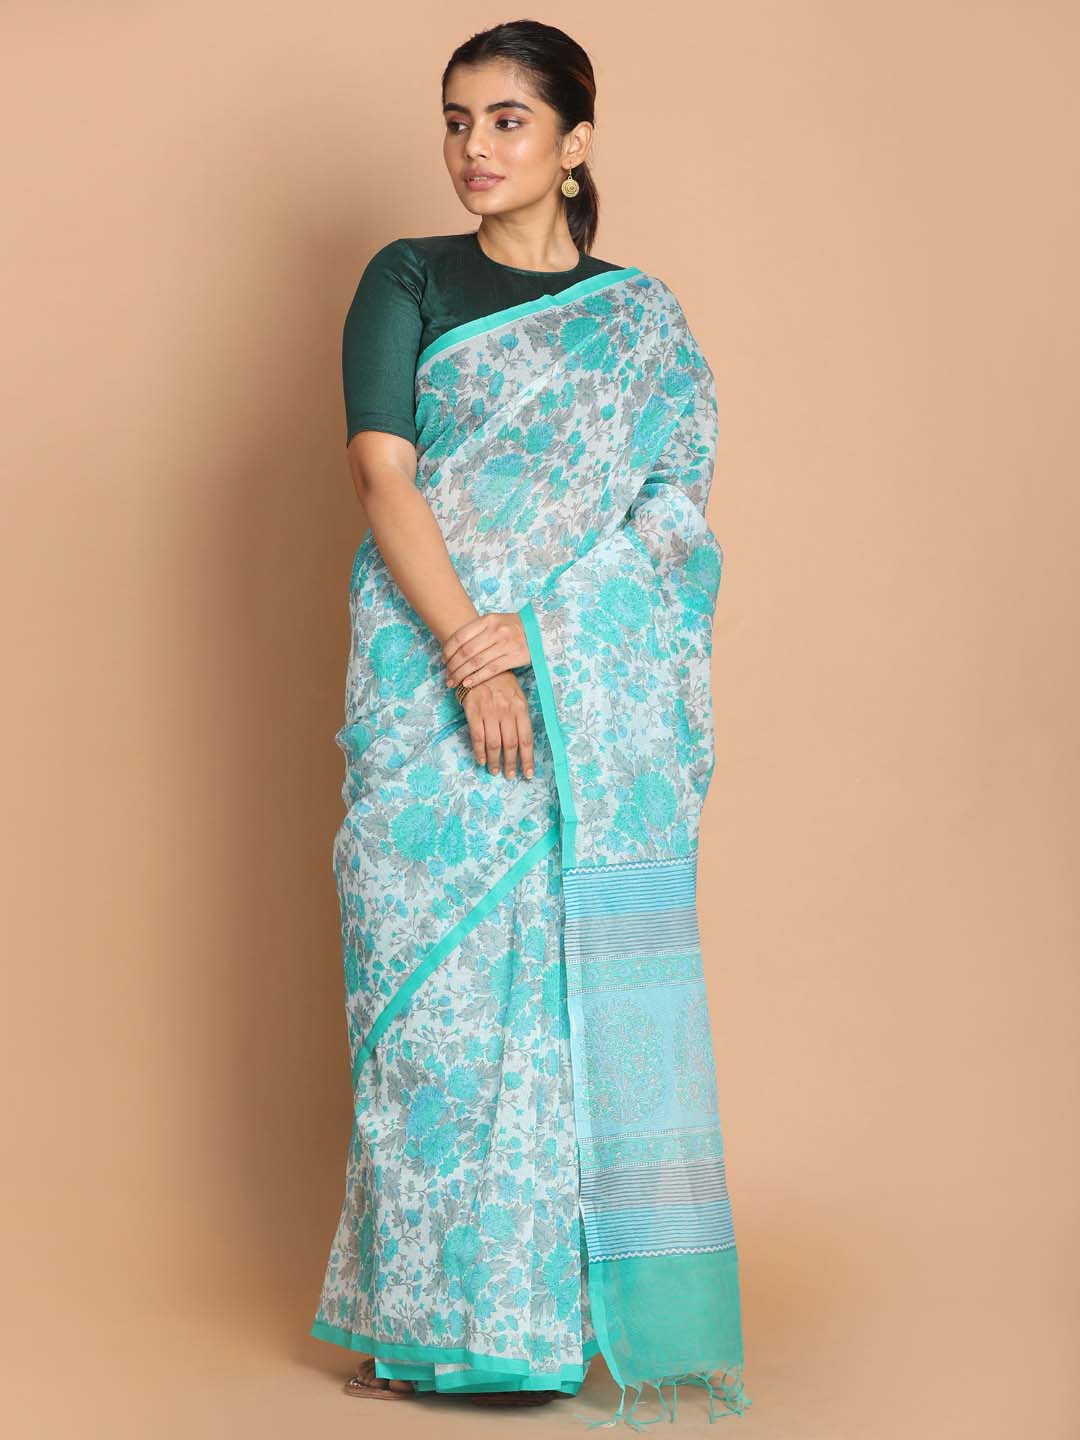 Indethnic Printed Cotton Blend Saree in Blue - View 1